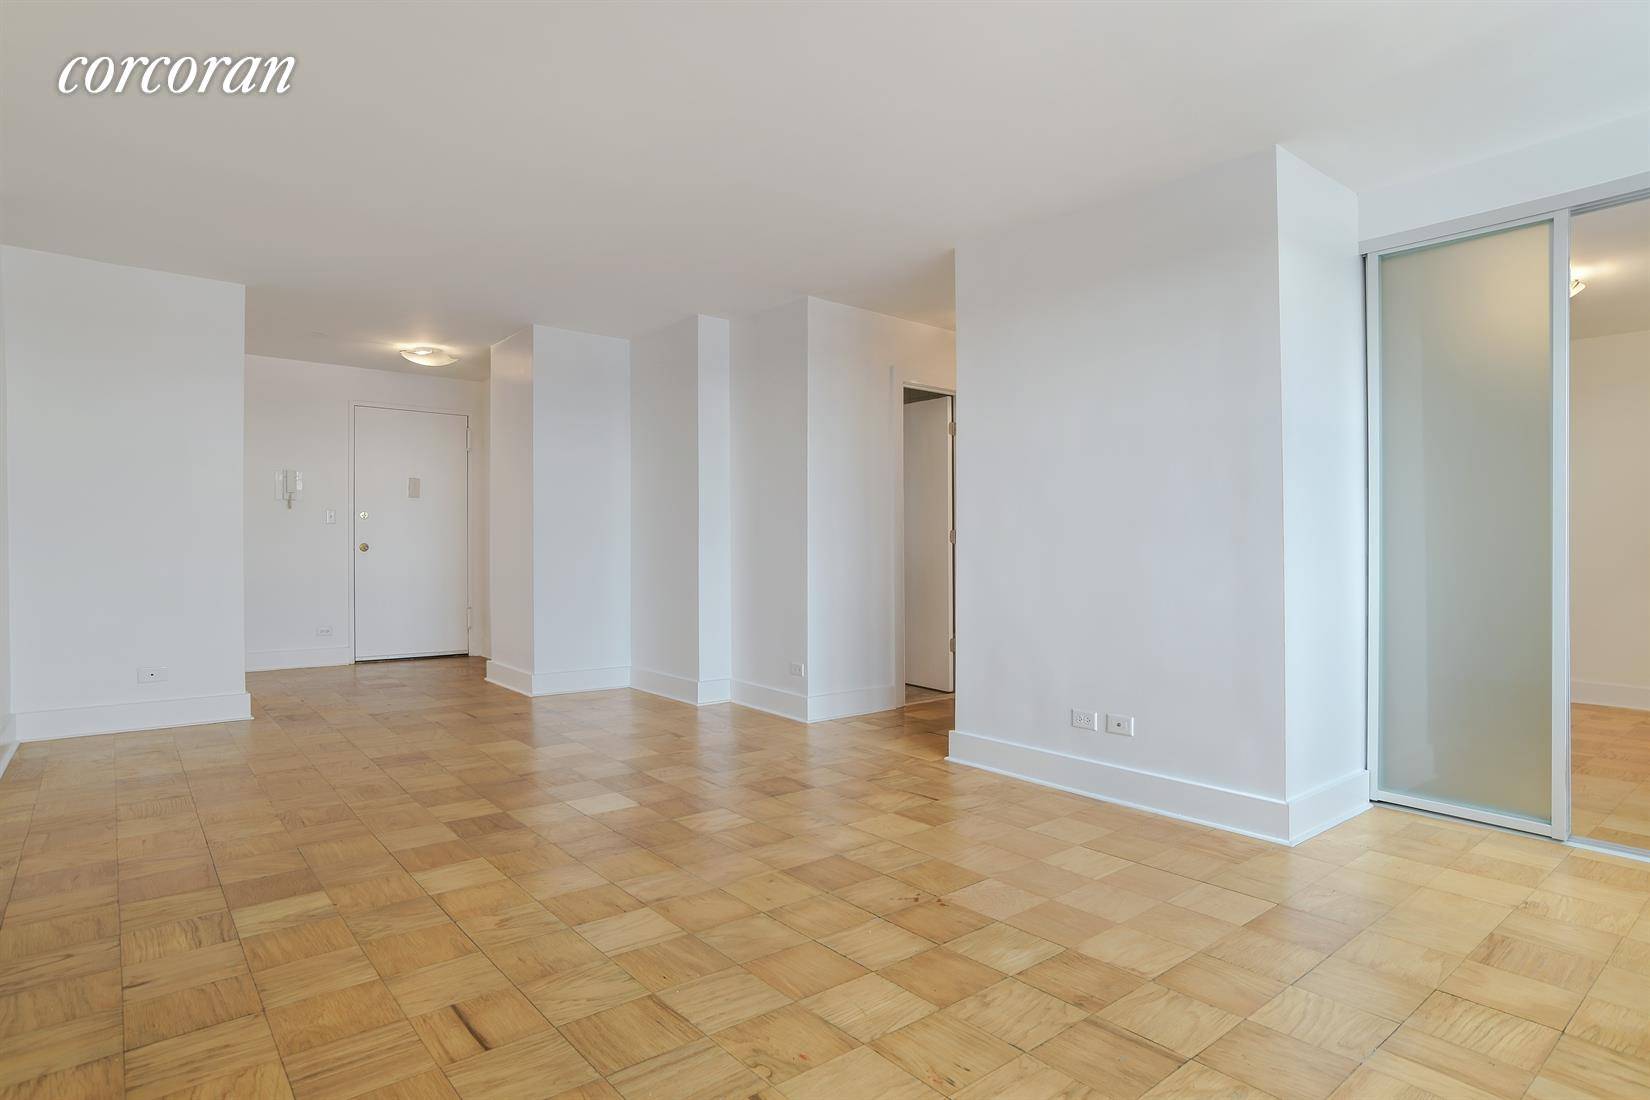 Kensington Beauty ! This gorgeous meticulously kept studio apartment is waiting for your arrival.